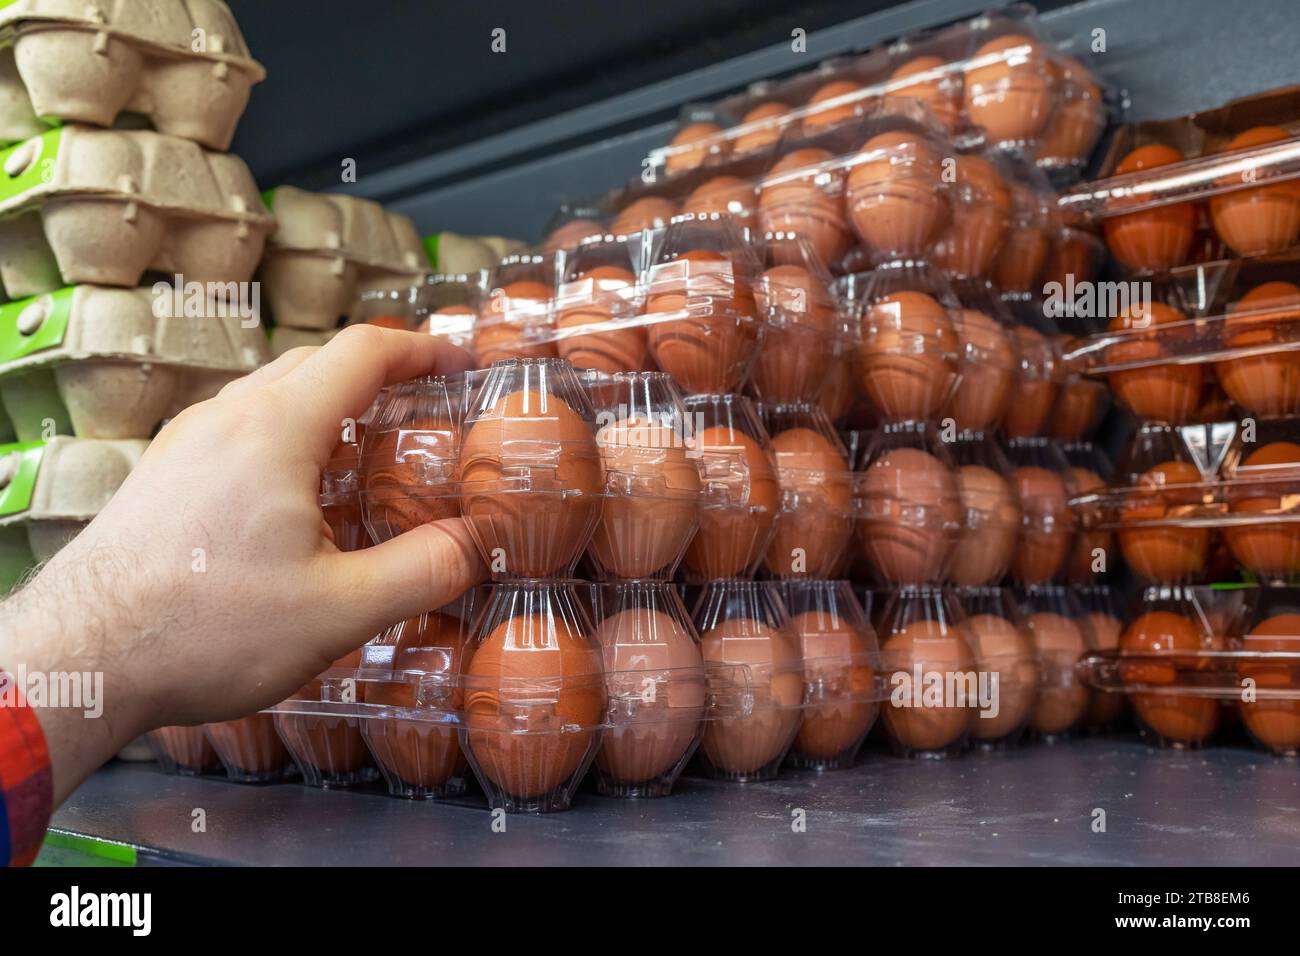 Chicken eggs on the store shelf. A customer takes a packaging of chicken eggs from a supermarket fridge. Containers of chicken eggs in a refrigerator Stock Photo